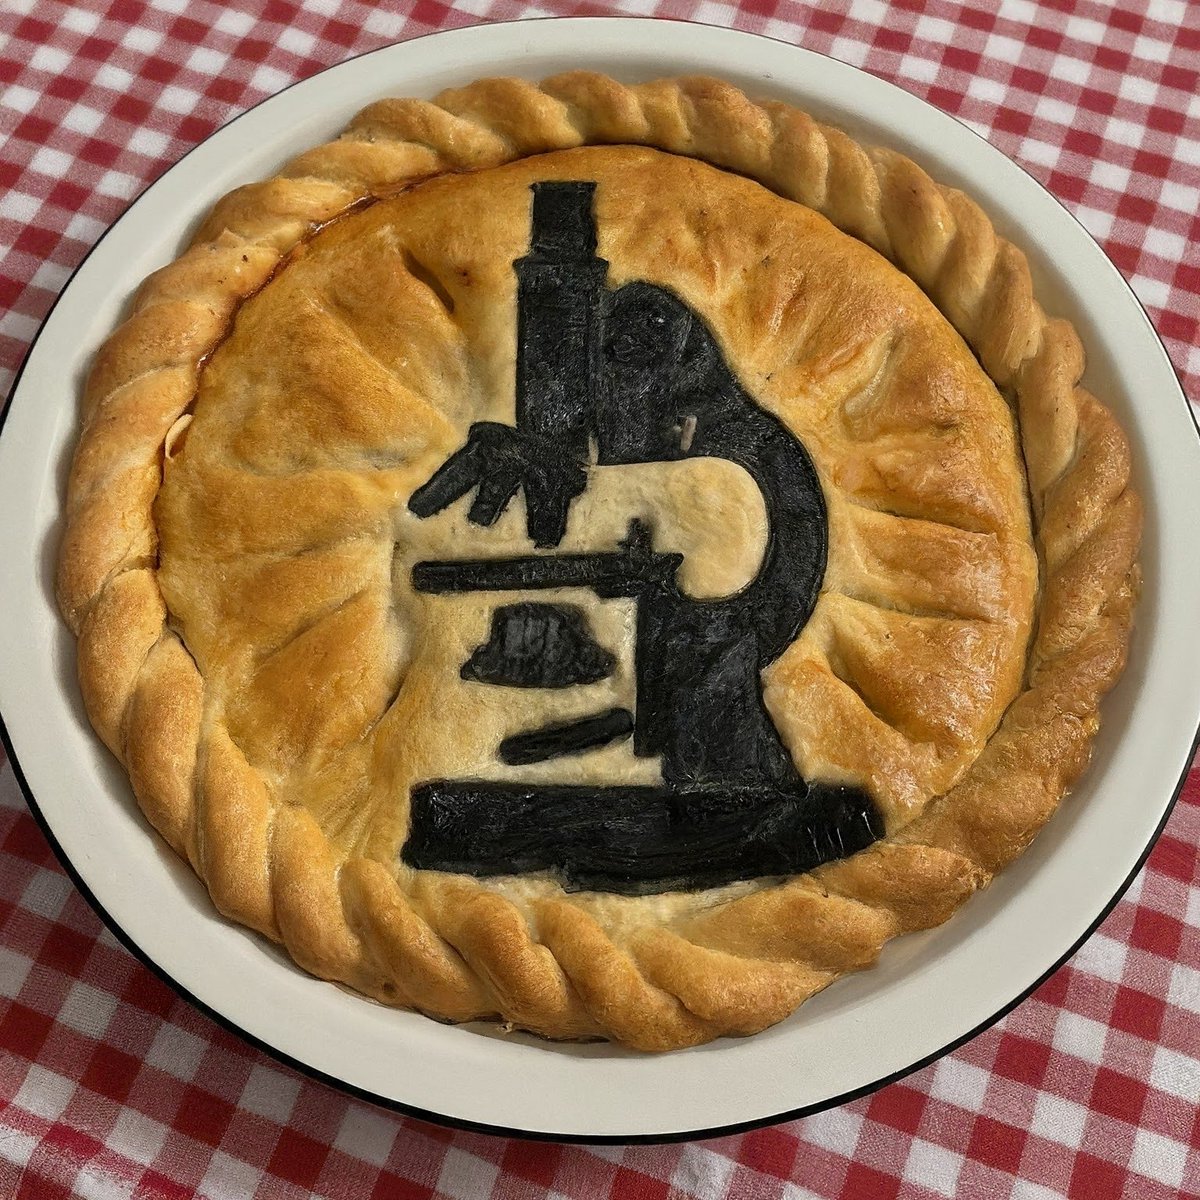 How to Celebrate #Pi #Day when you are a #microscopist: 1. Eat some delicious pie. 2. Submit your best images to Microscopy Today's Micrograph Competition! The submission deadline is tomorrow, so head over to microscopy.org/microscopy-tod… and submit yours today!